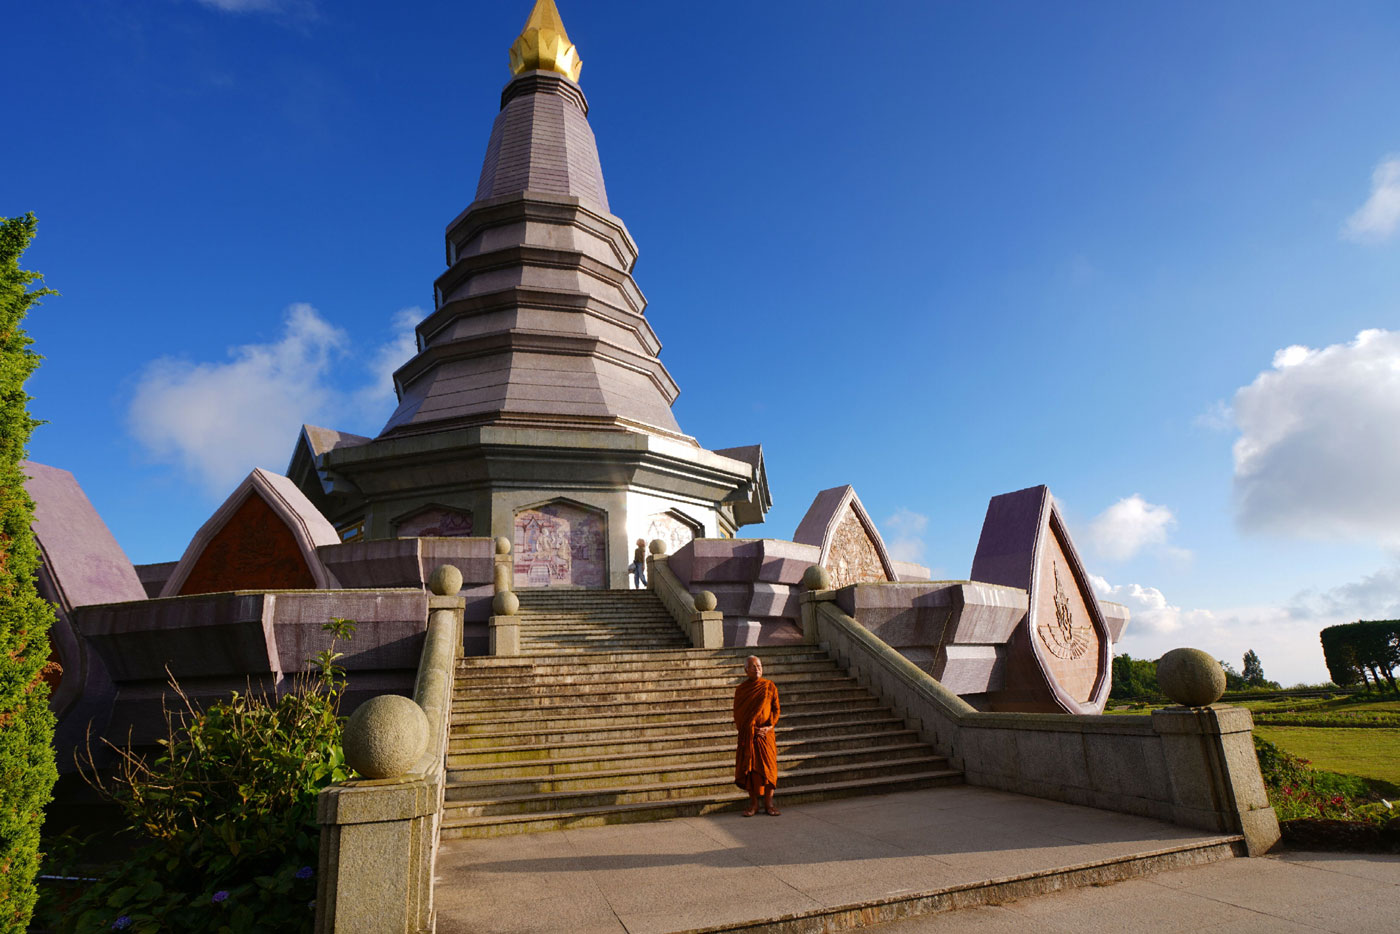 Once you finish quarantine you can travel to other ares of Thailand such as Doi Inthanon National Park